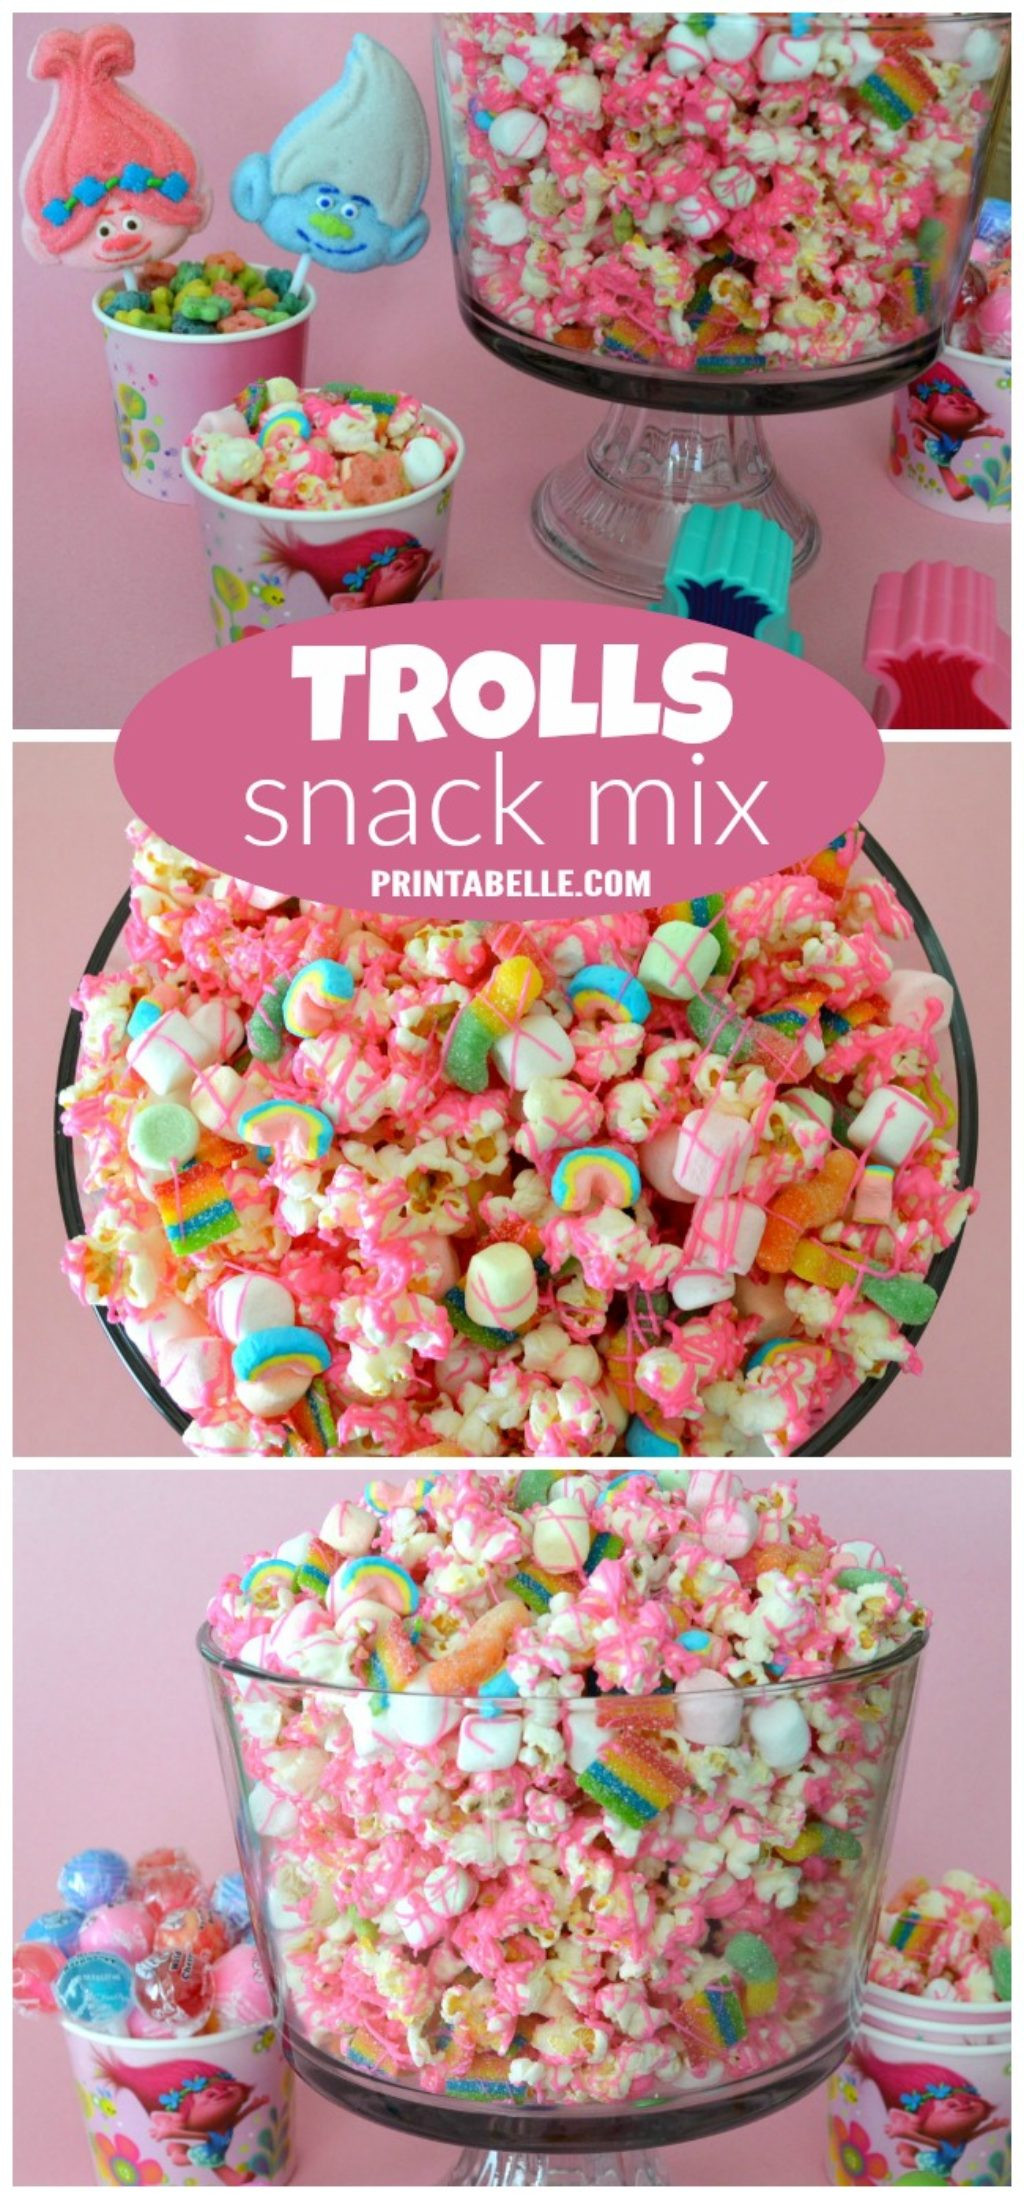 Food Ideas For A Troll Birthday Party
 Poppy’s Pink Trolls Party Snack Mix – Party Printable